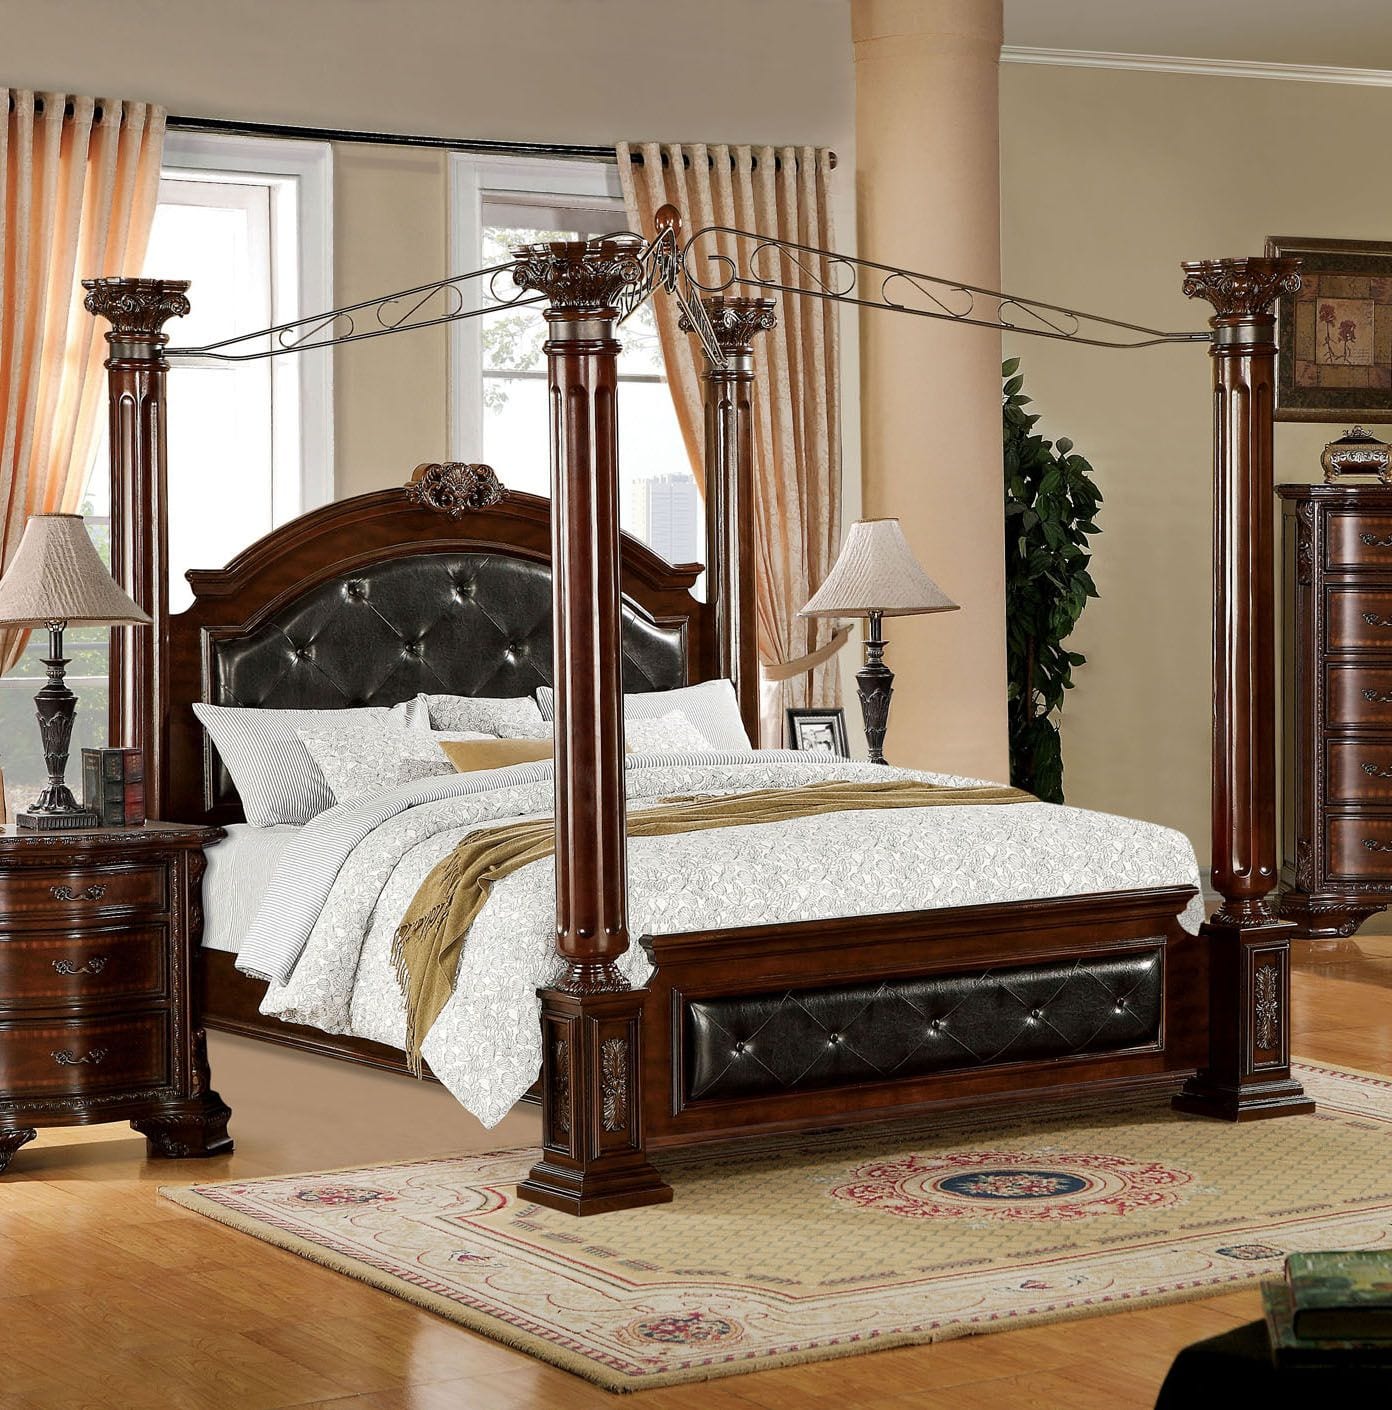 Cm7271q Traditional Brown Cherry Finish Queen Canopy Bed Luchy Amor Furniture